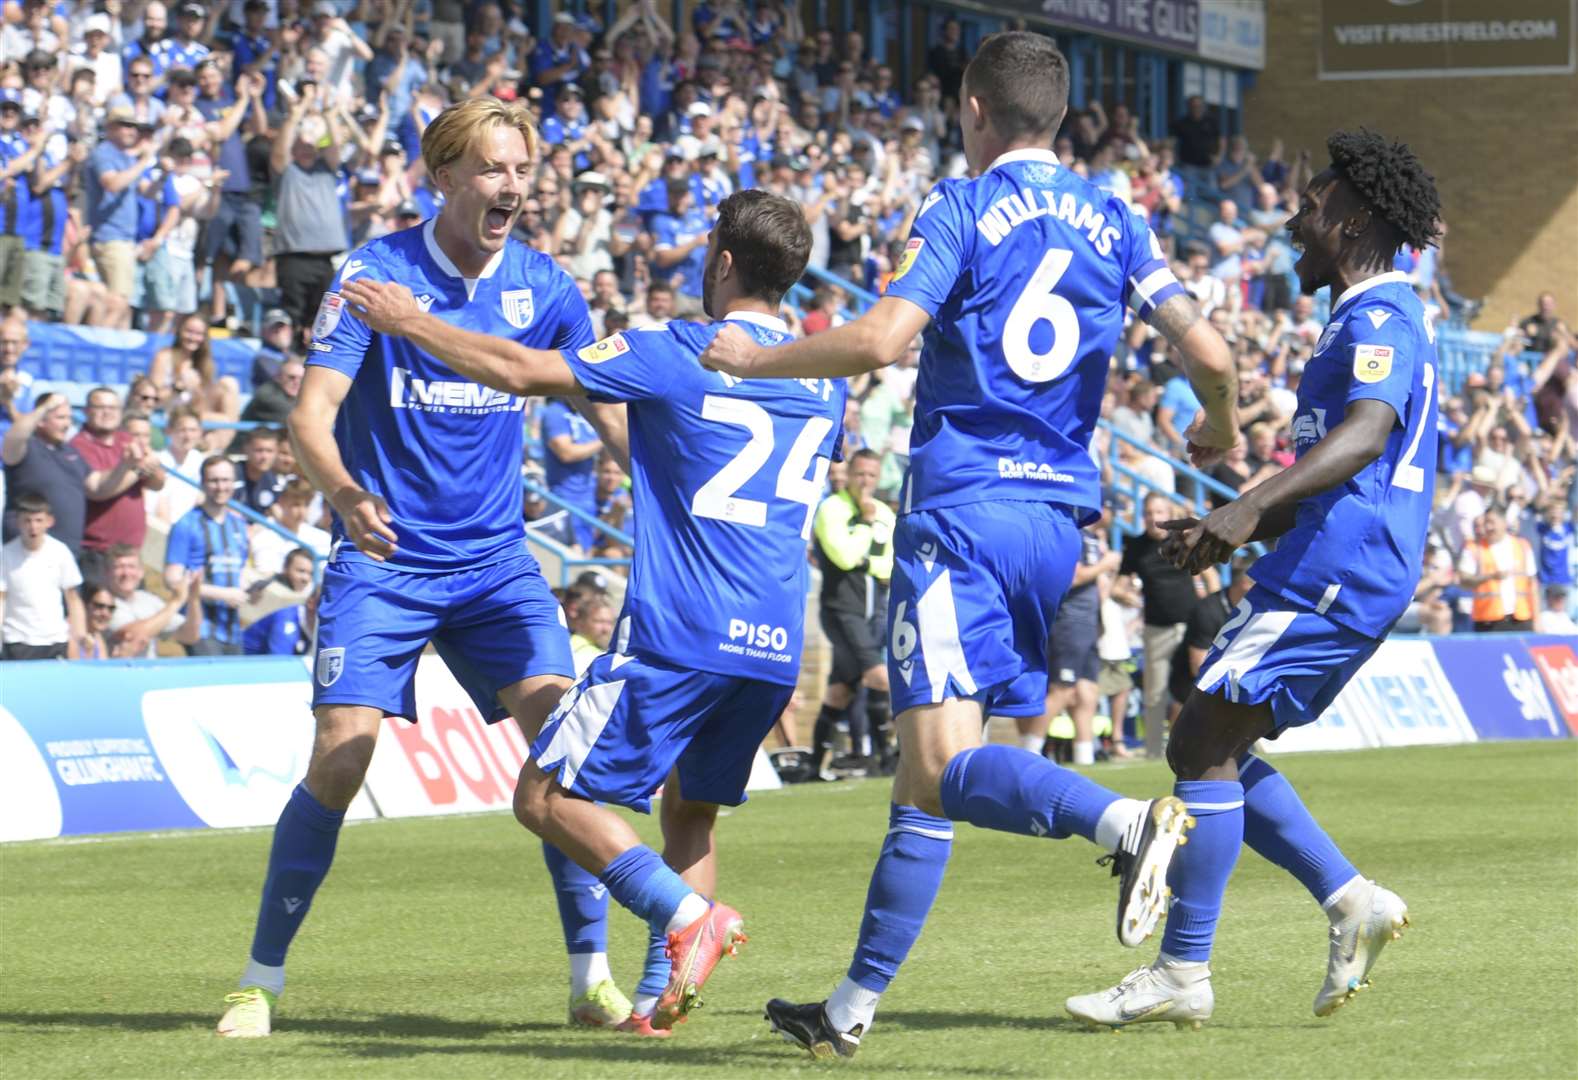 Gillingham's players celebrate after Scott Kashket scored what proved to be the winner against Rochdale on Saturday. Picture: Barry Goodwin